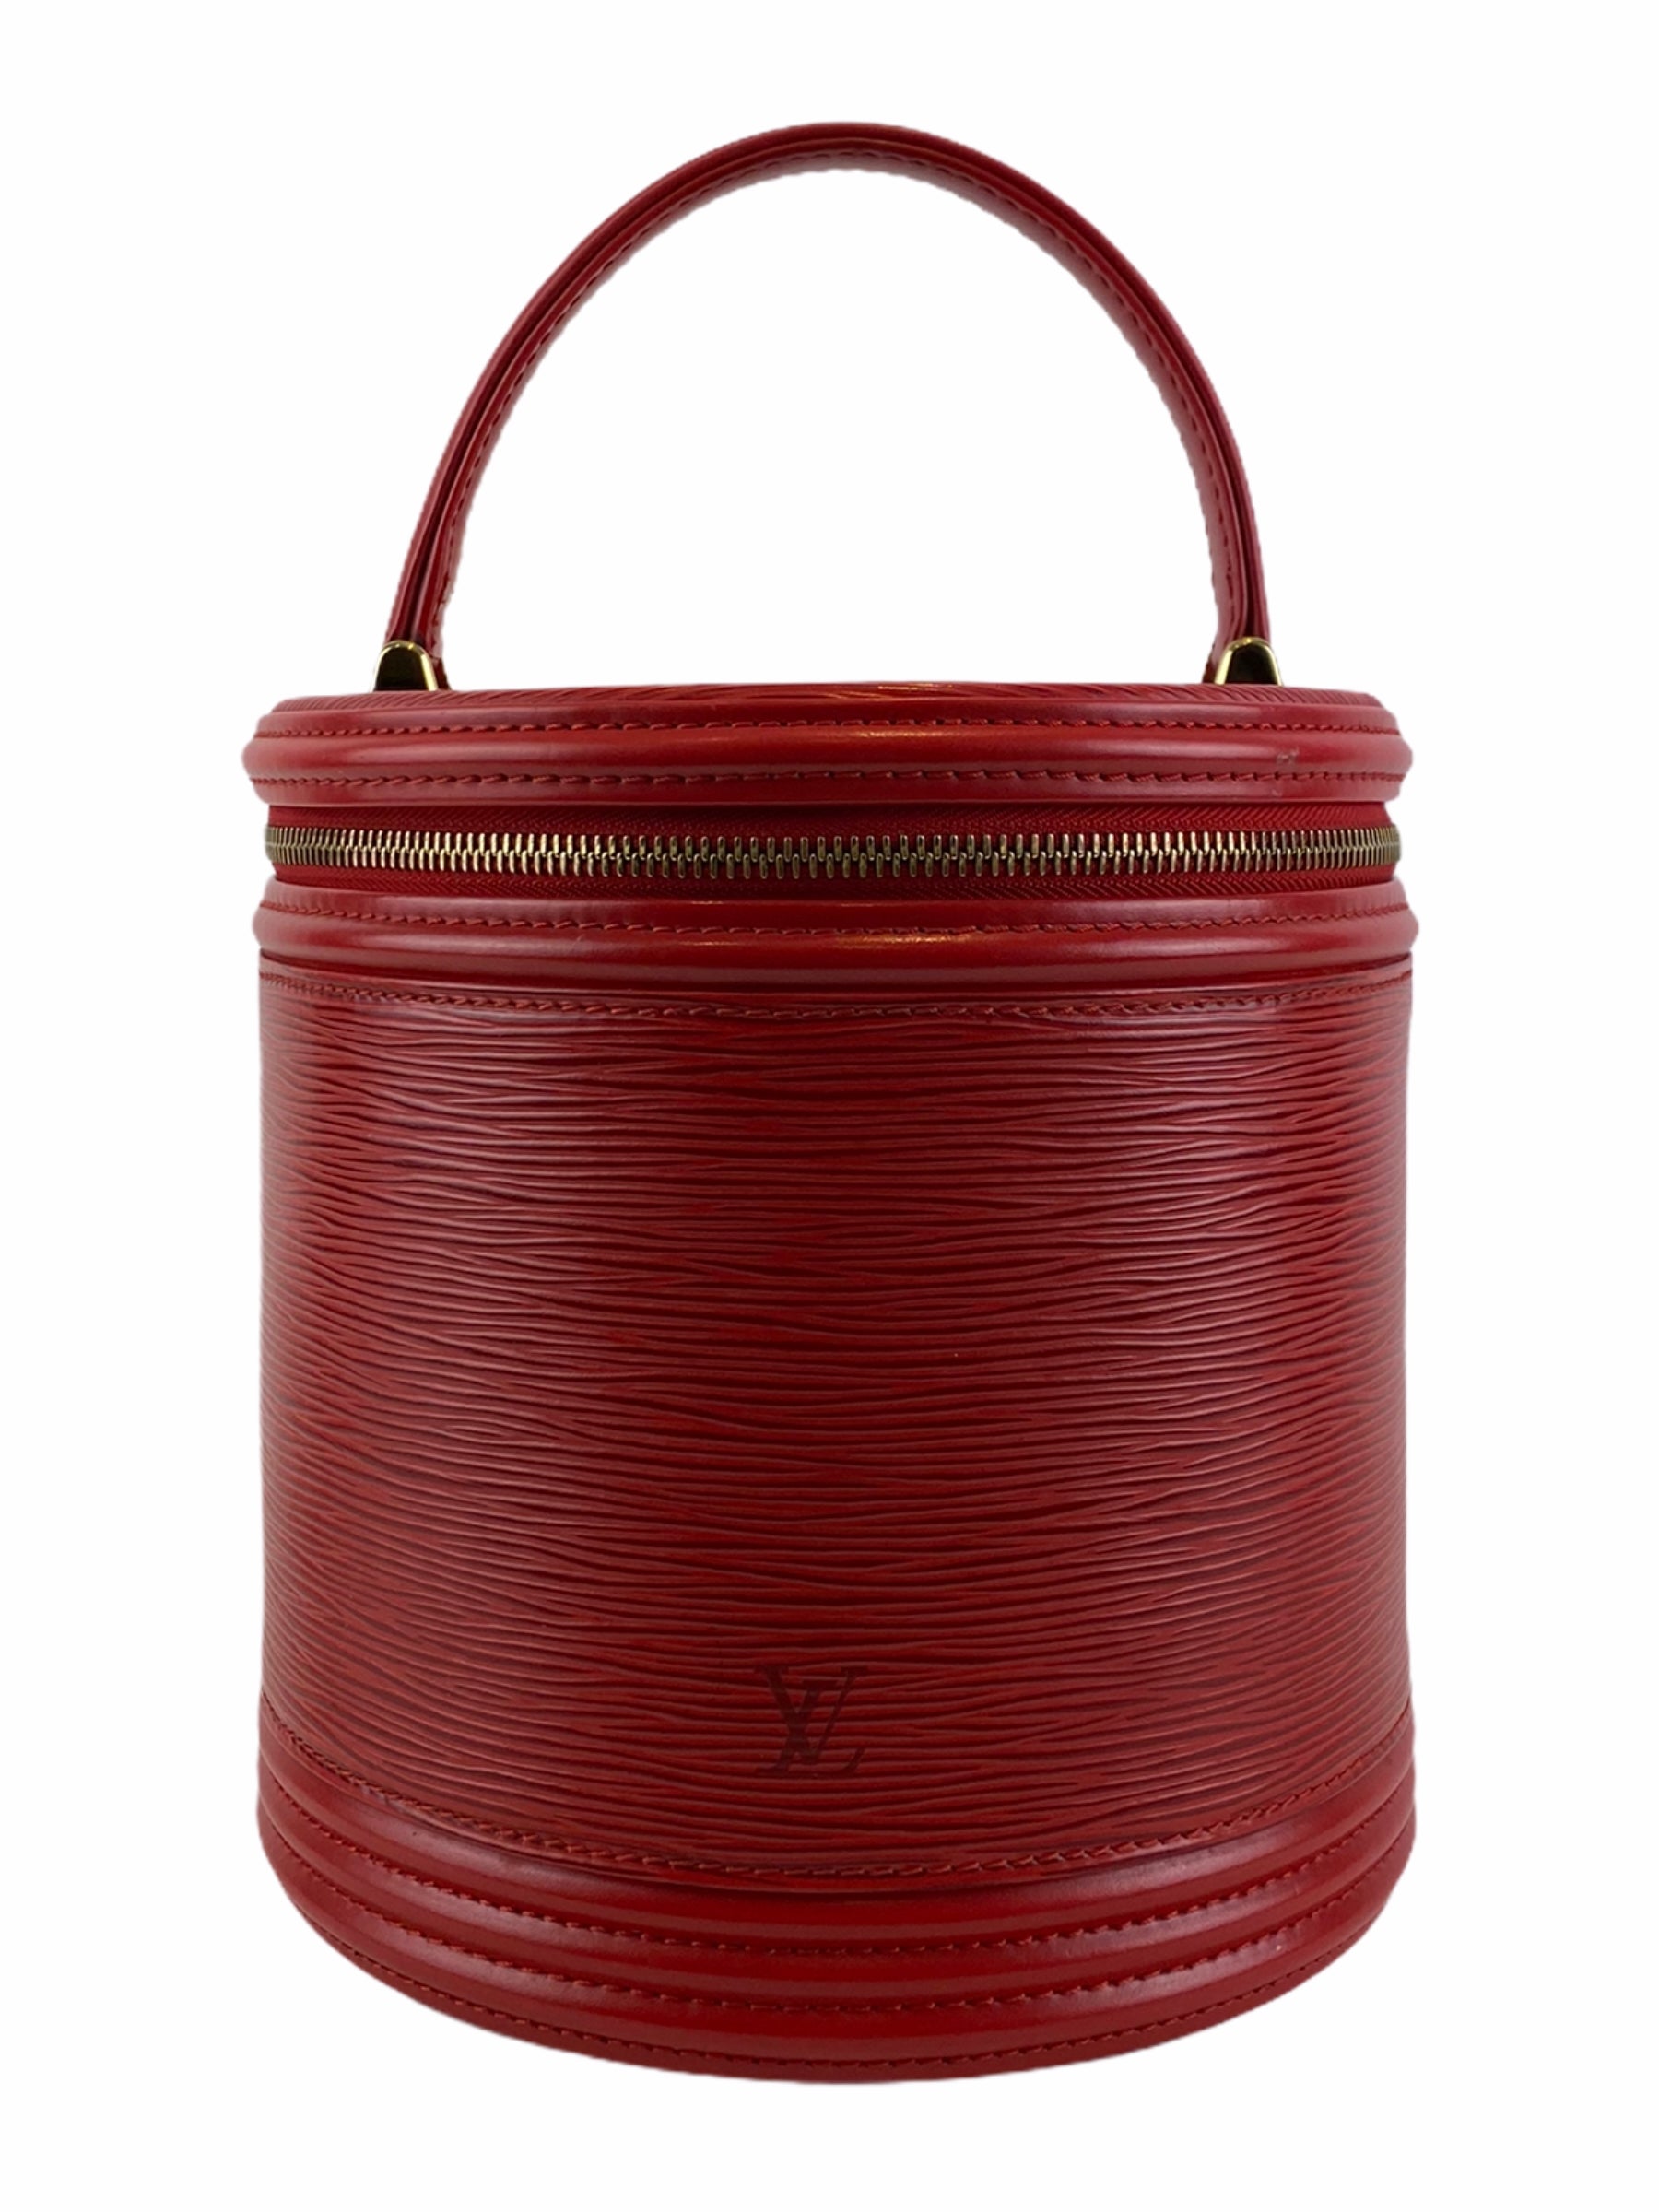 LOUIS VUITTON. Bucket bag in red epi leather, model Noé…